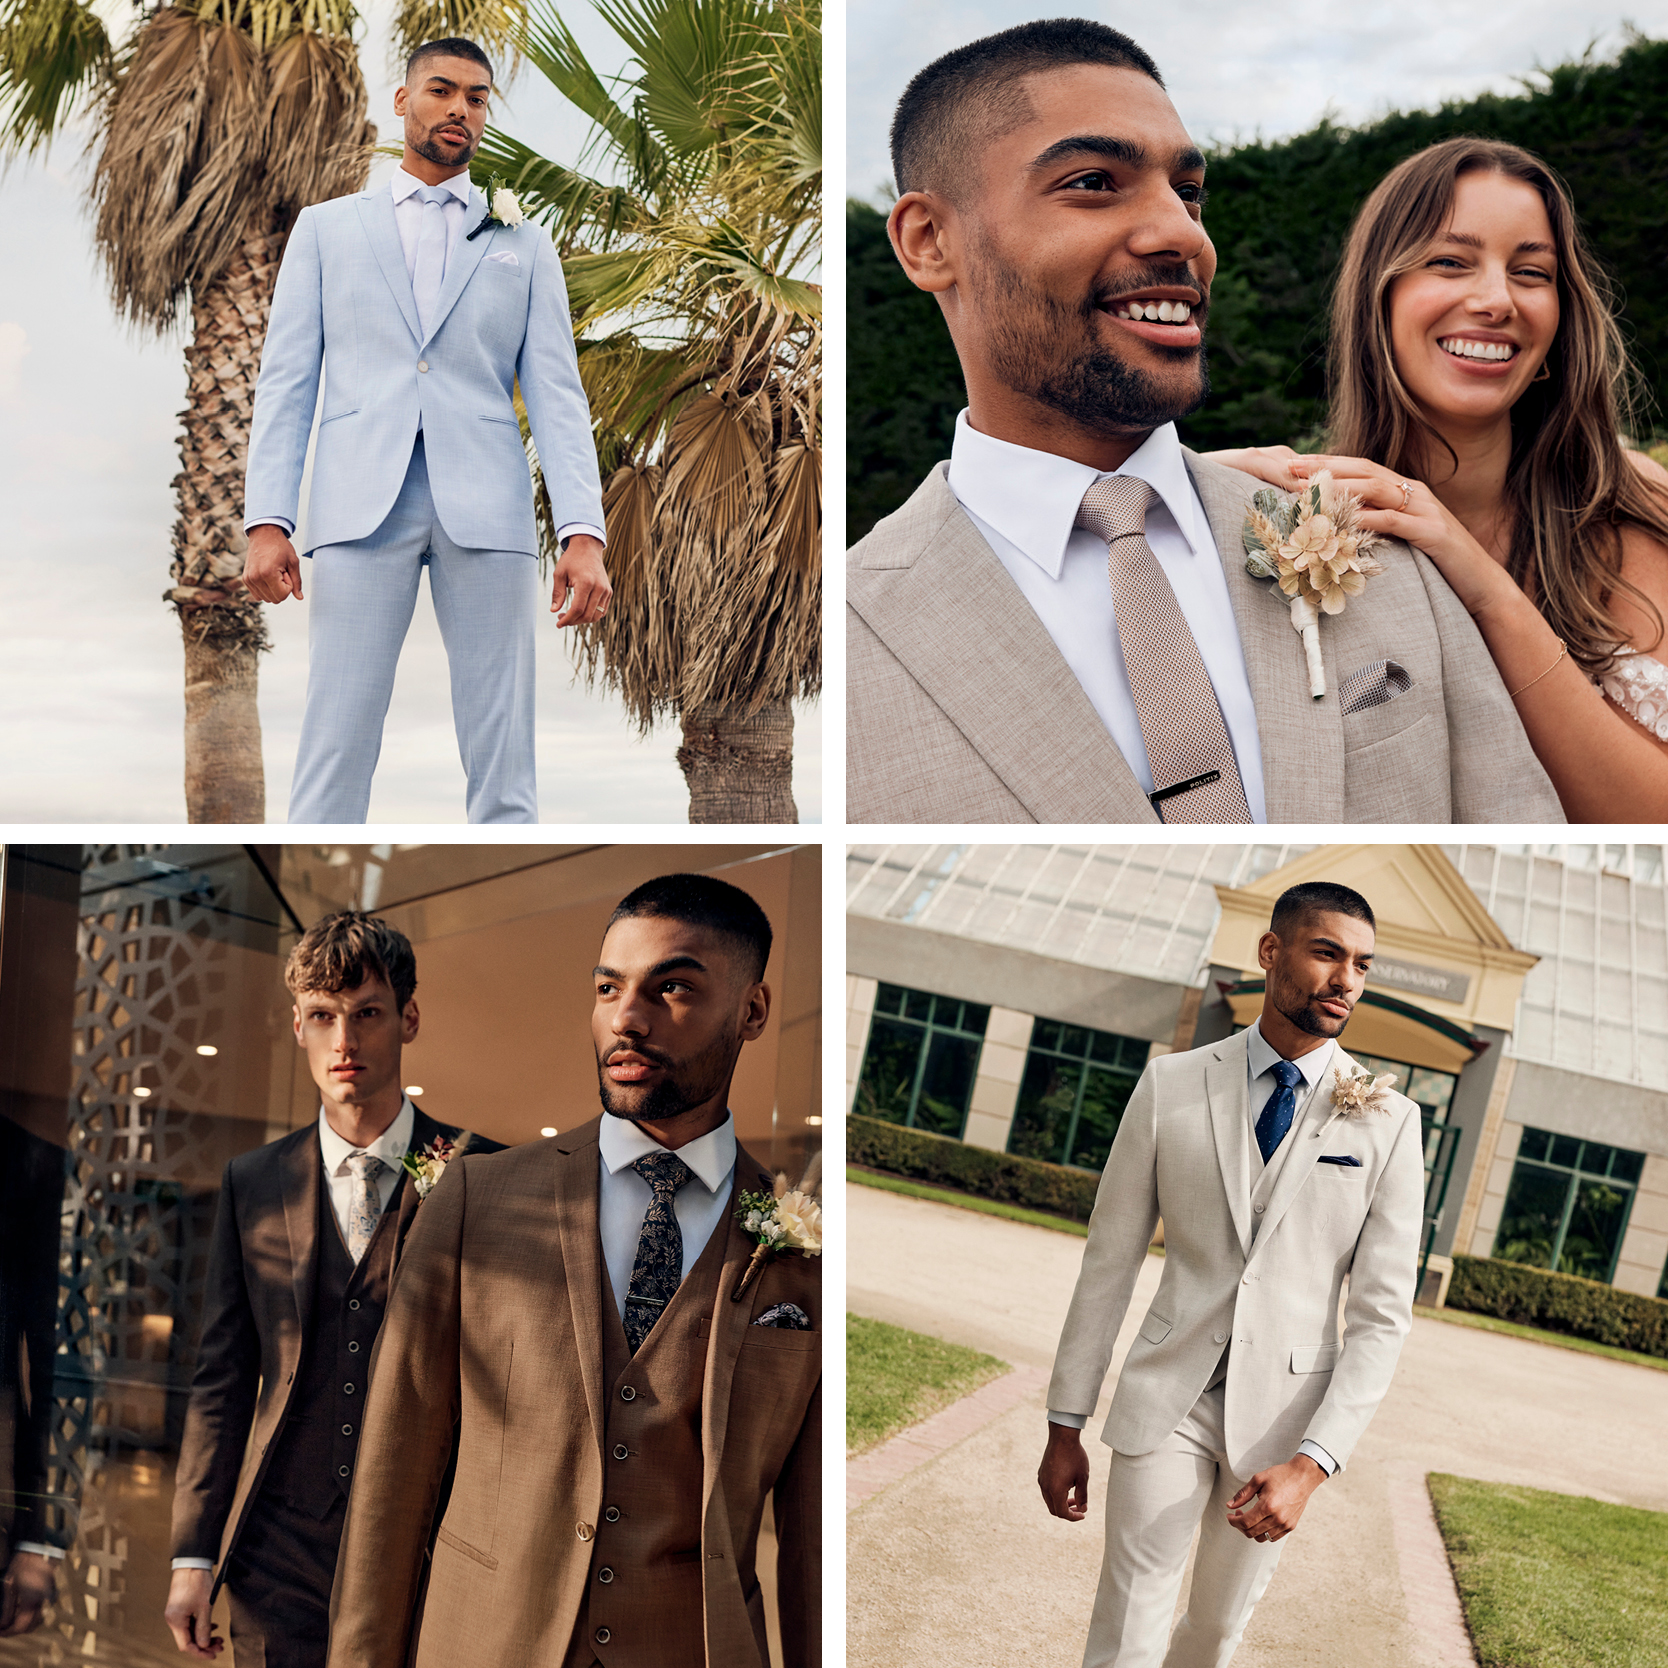 Collage image of models representing season appropriate Wedding outfits